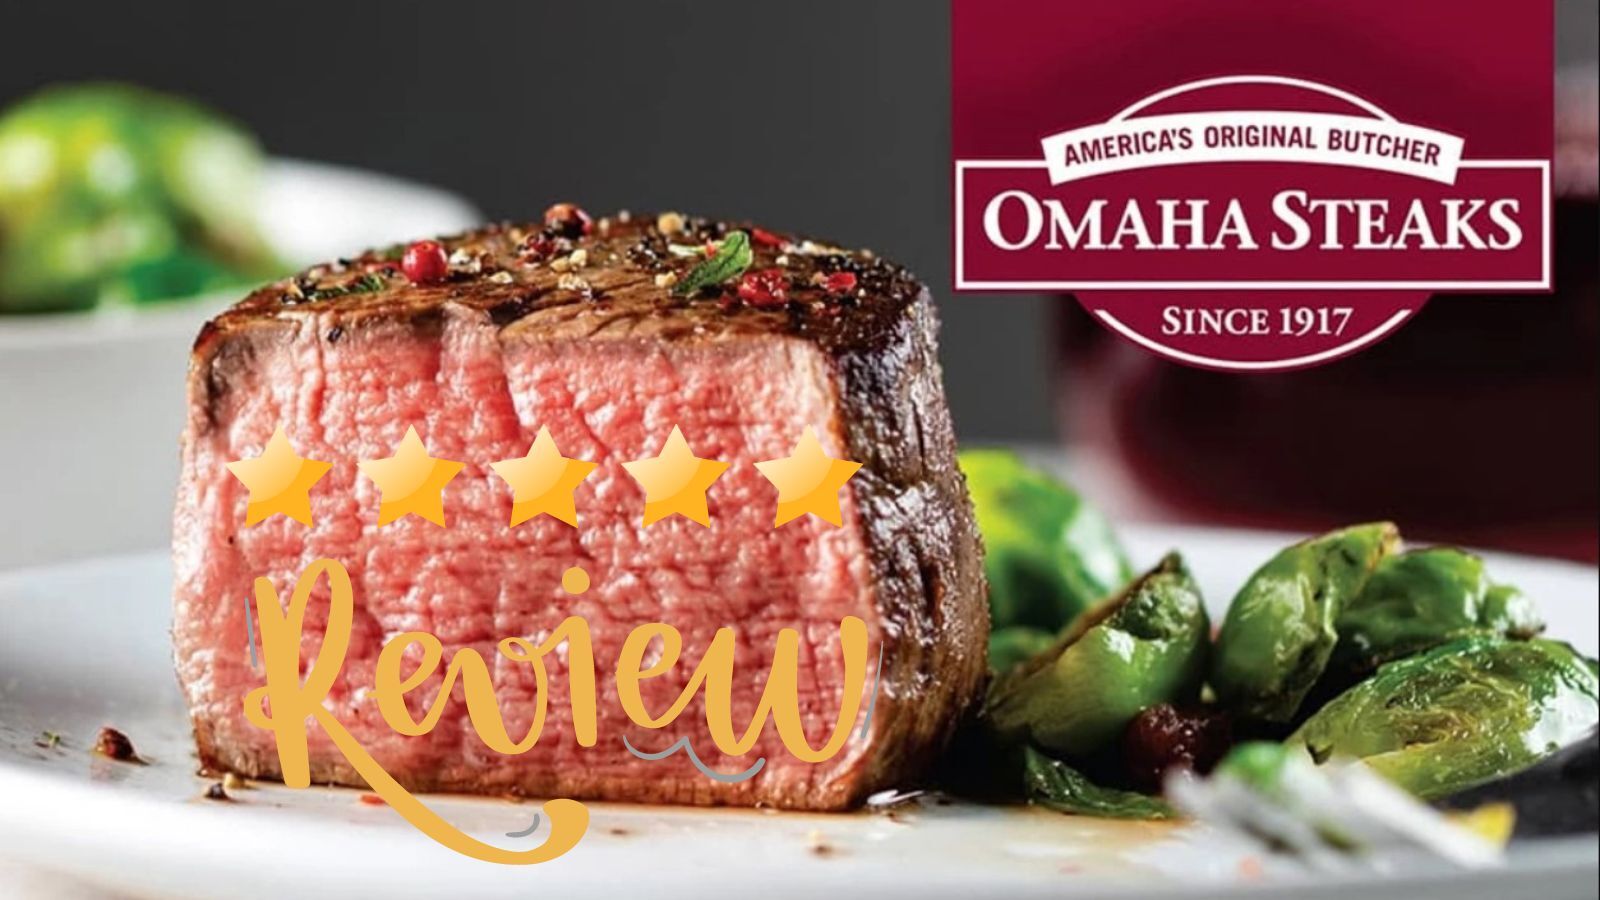 Omaha Steaks Review Why Are They So Delicious? Cherry Picks